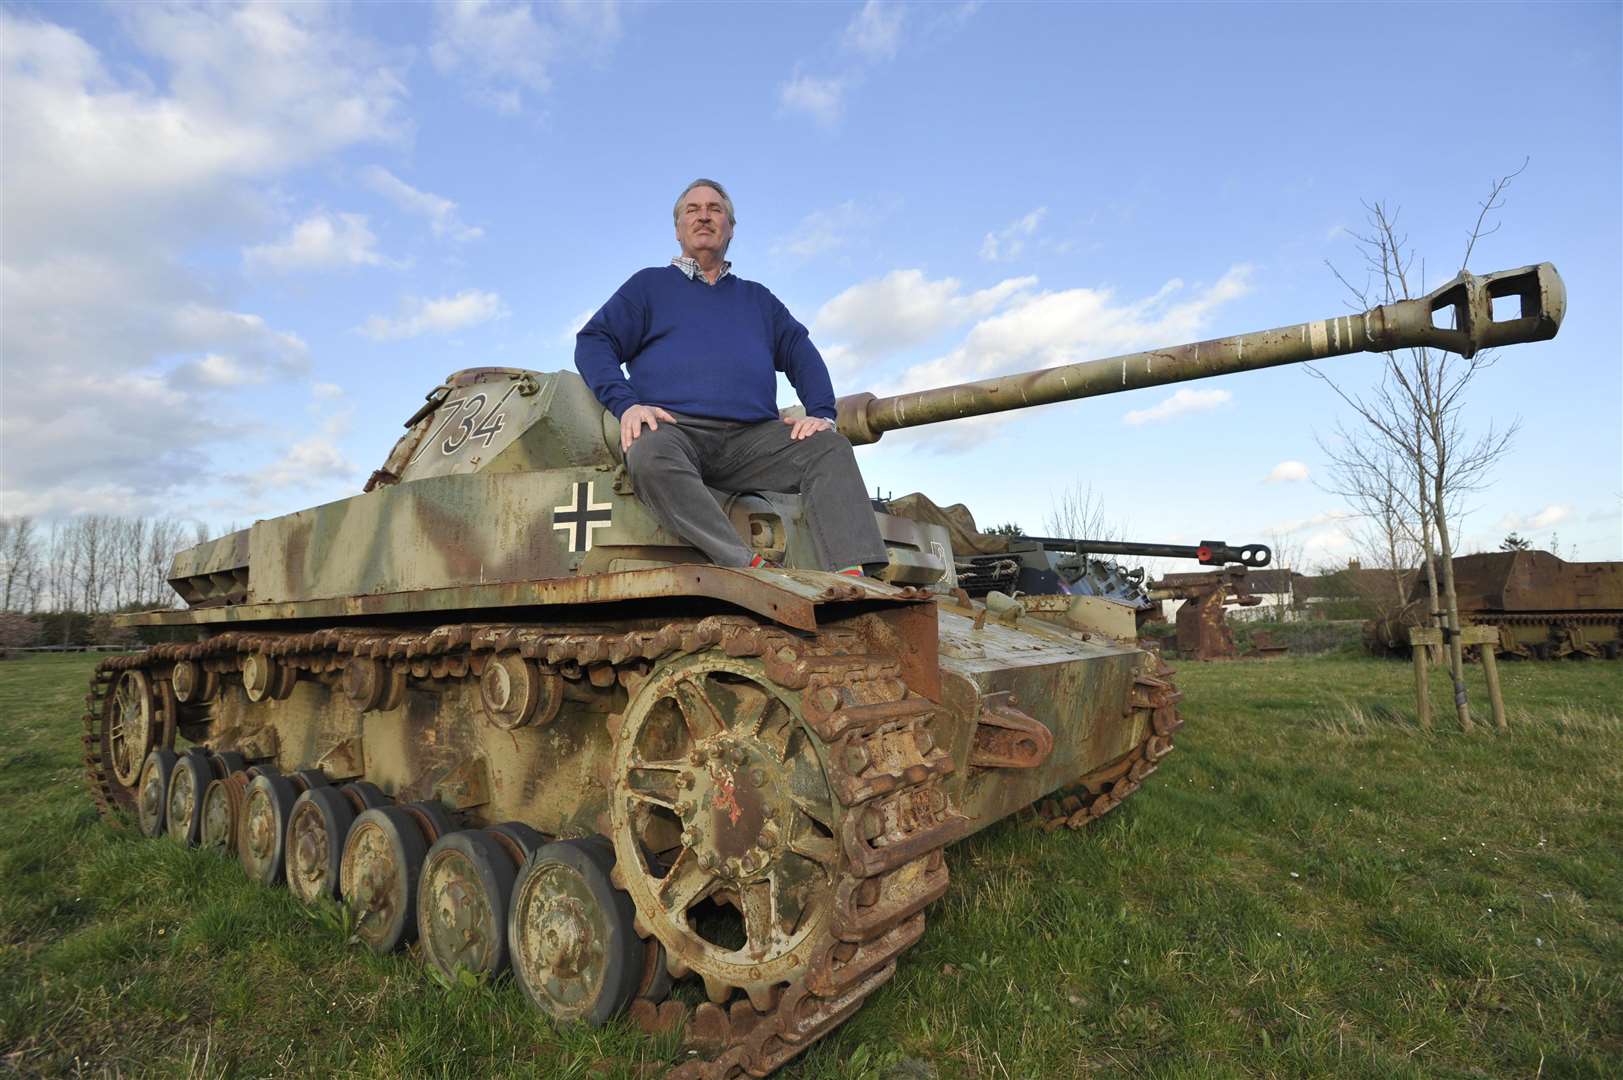 Care home provider Rex Cadman organised the War and Peace Show - the UK's longest running military vehicle event - until he retired in 2015